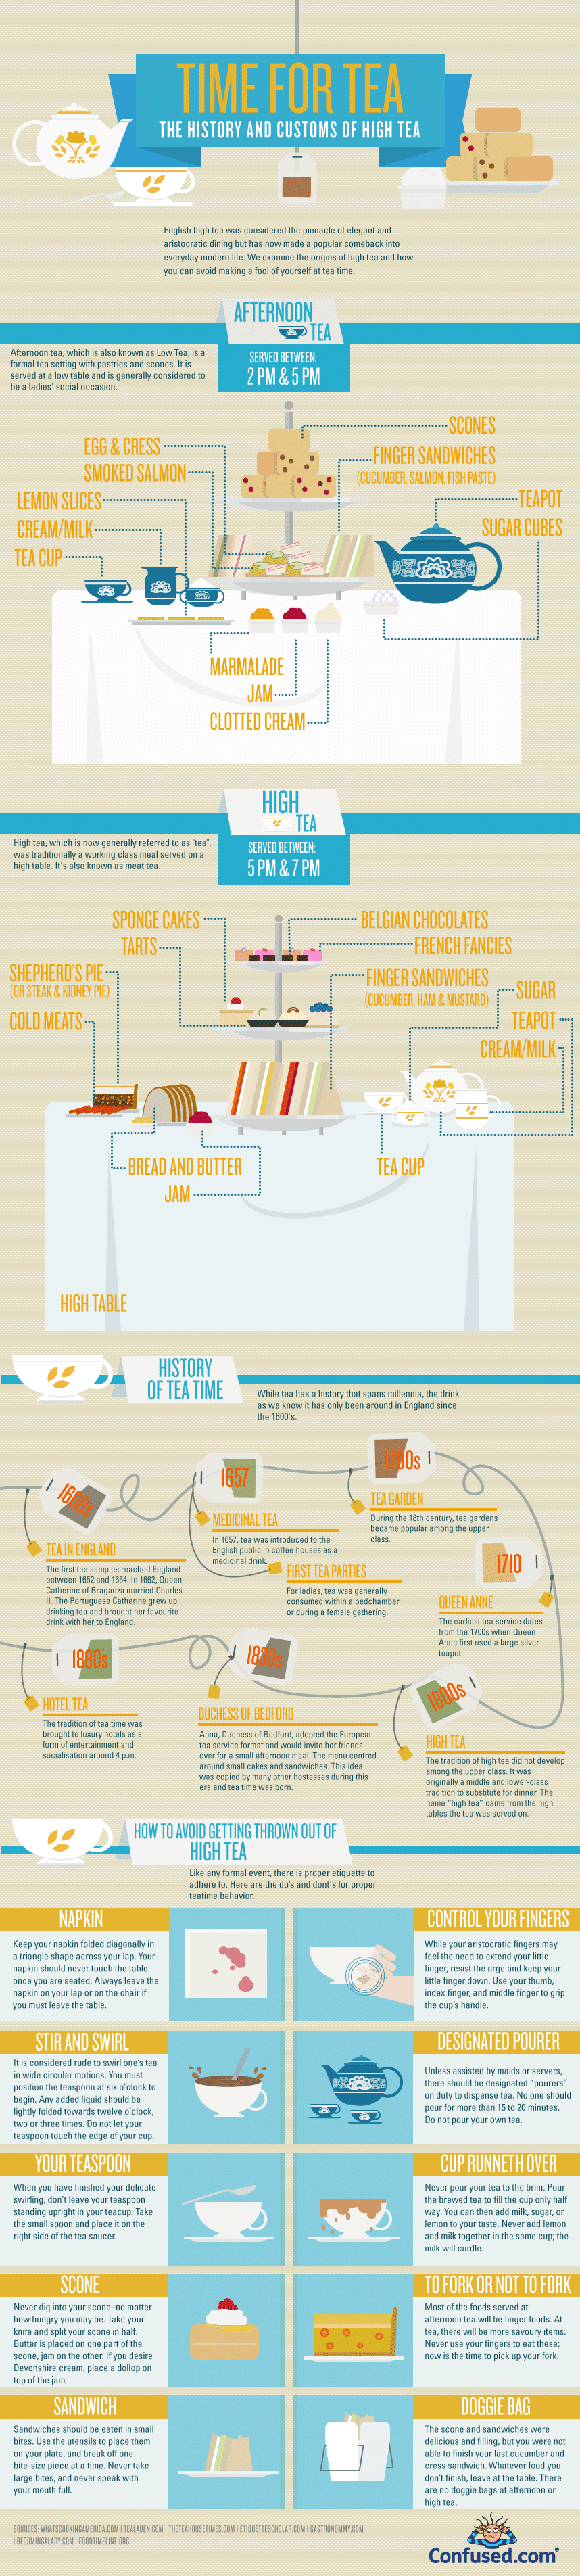 Time For Tea History Infographic